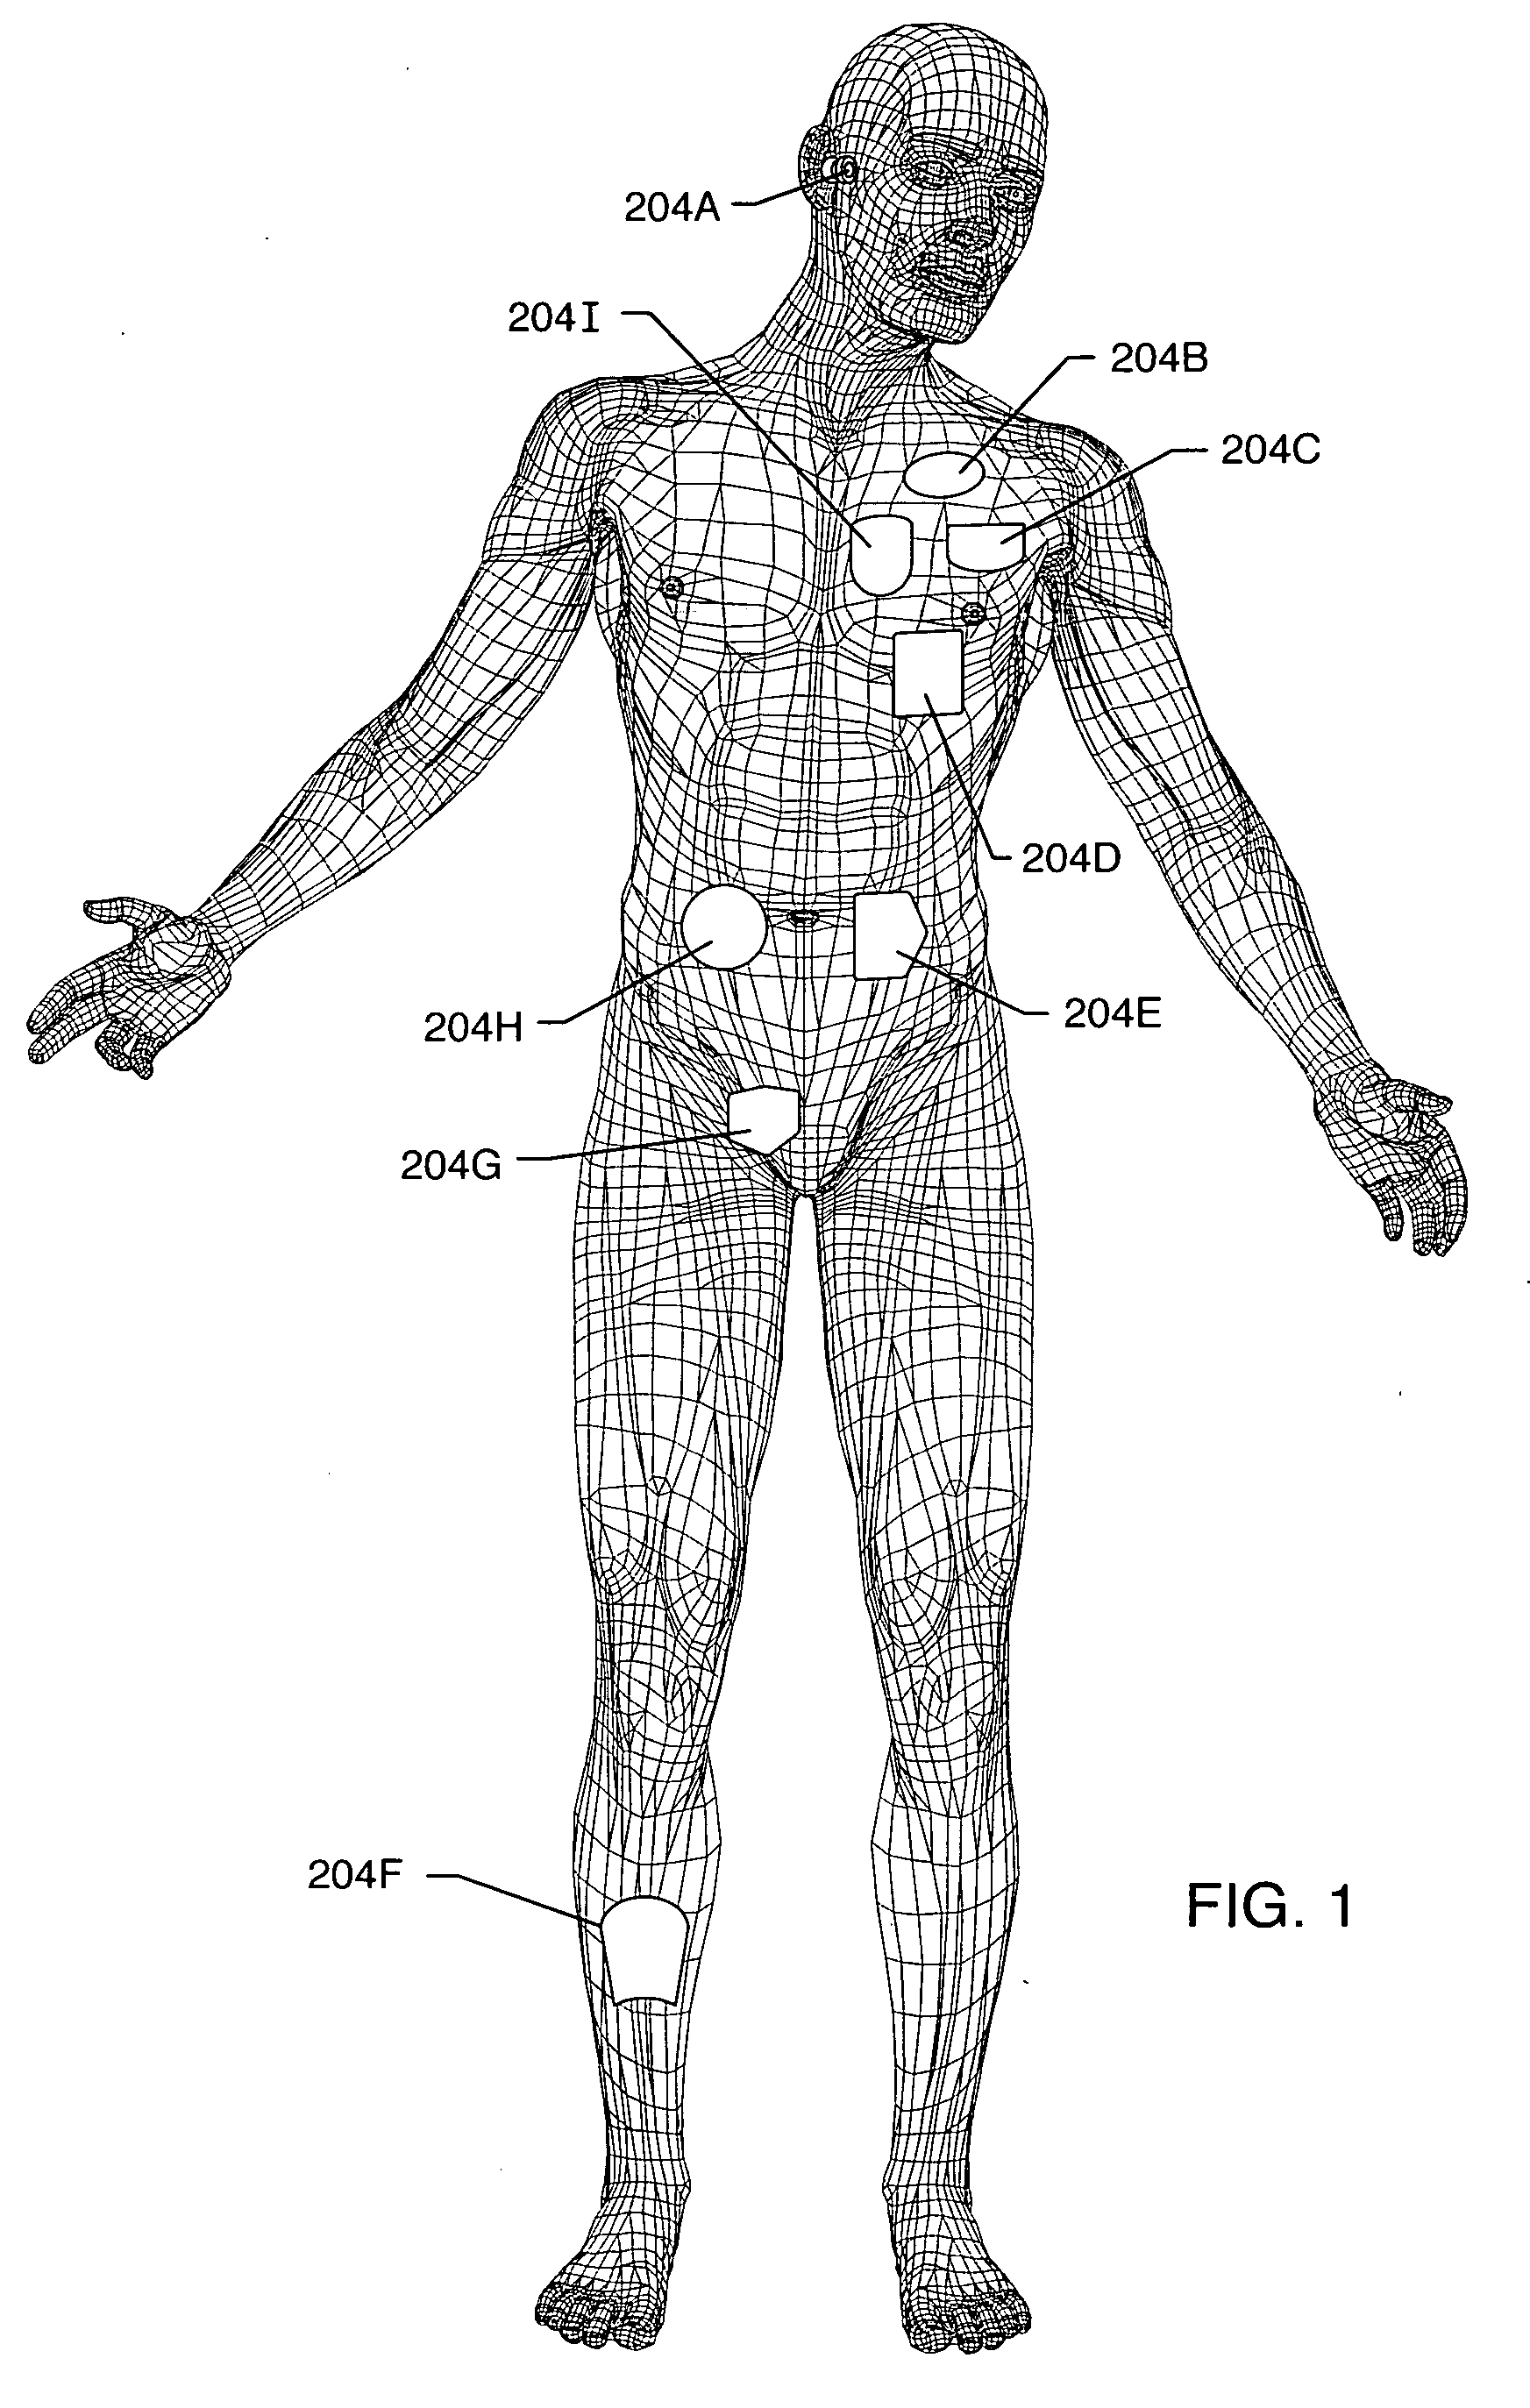 Apparatus and process for reducing the susceptability of active implantable medical devices to medical procedures such as magnetic resonance imaging